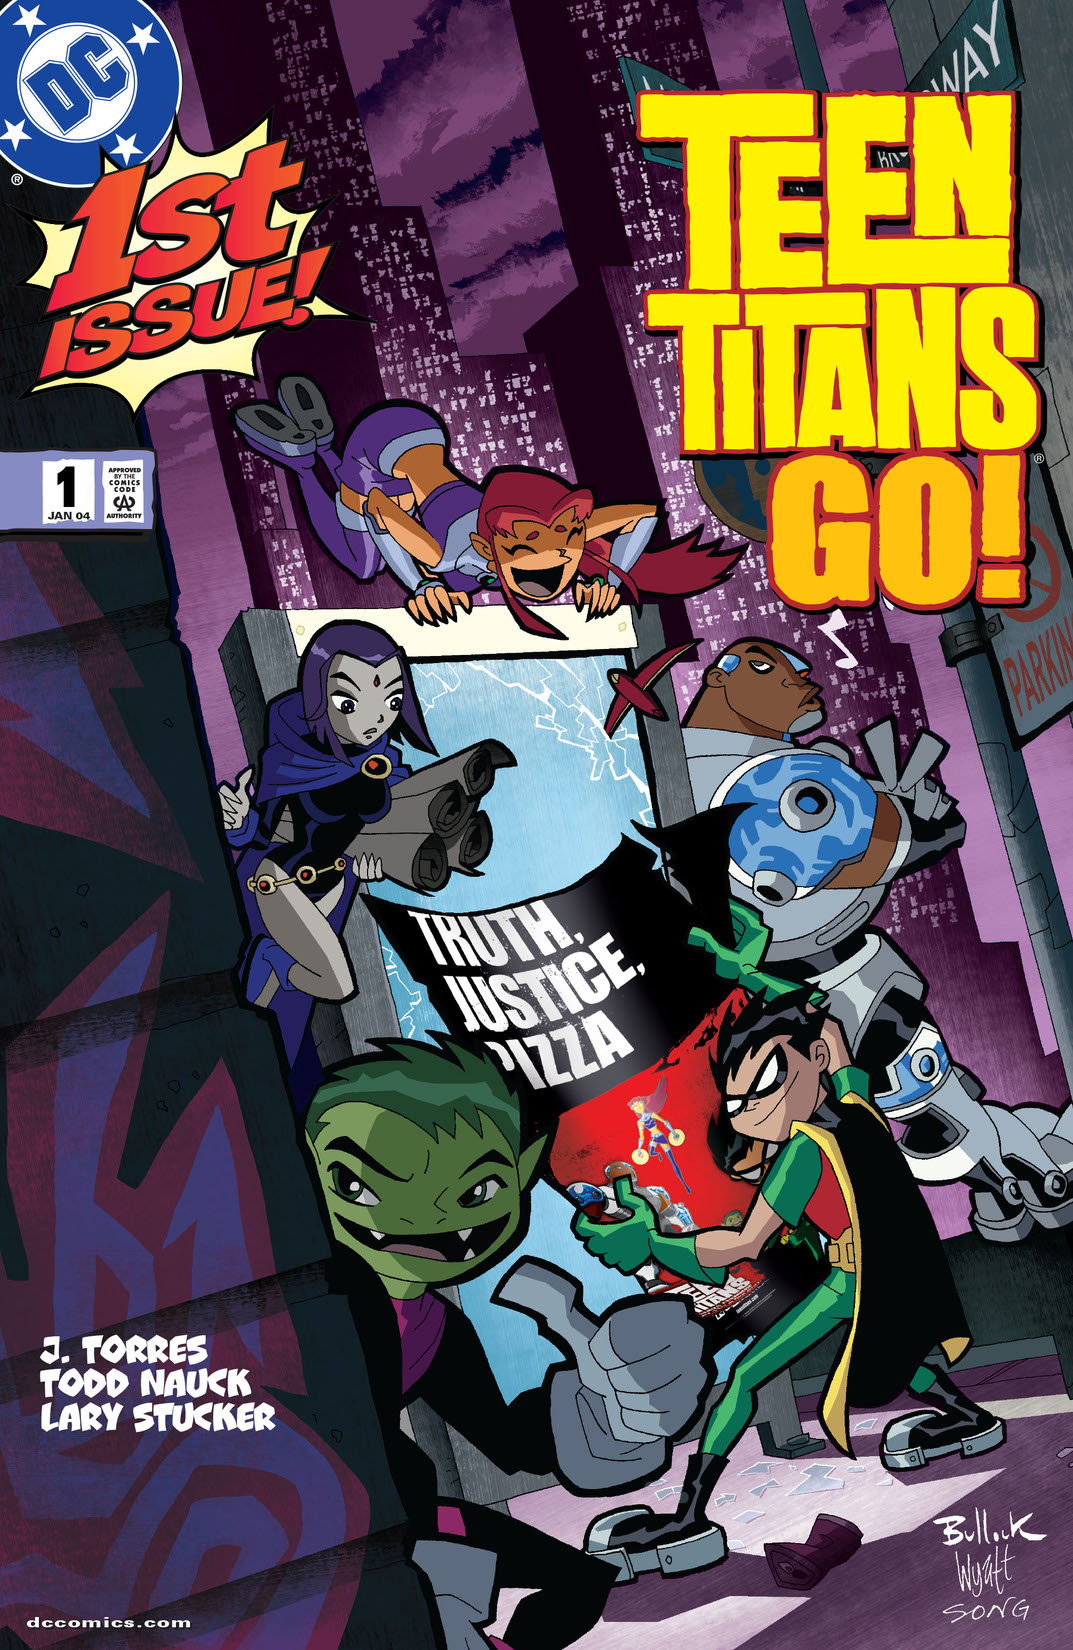 Teen Titans Go! (2003-) #1 preview images